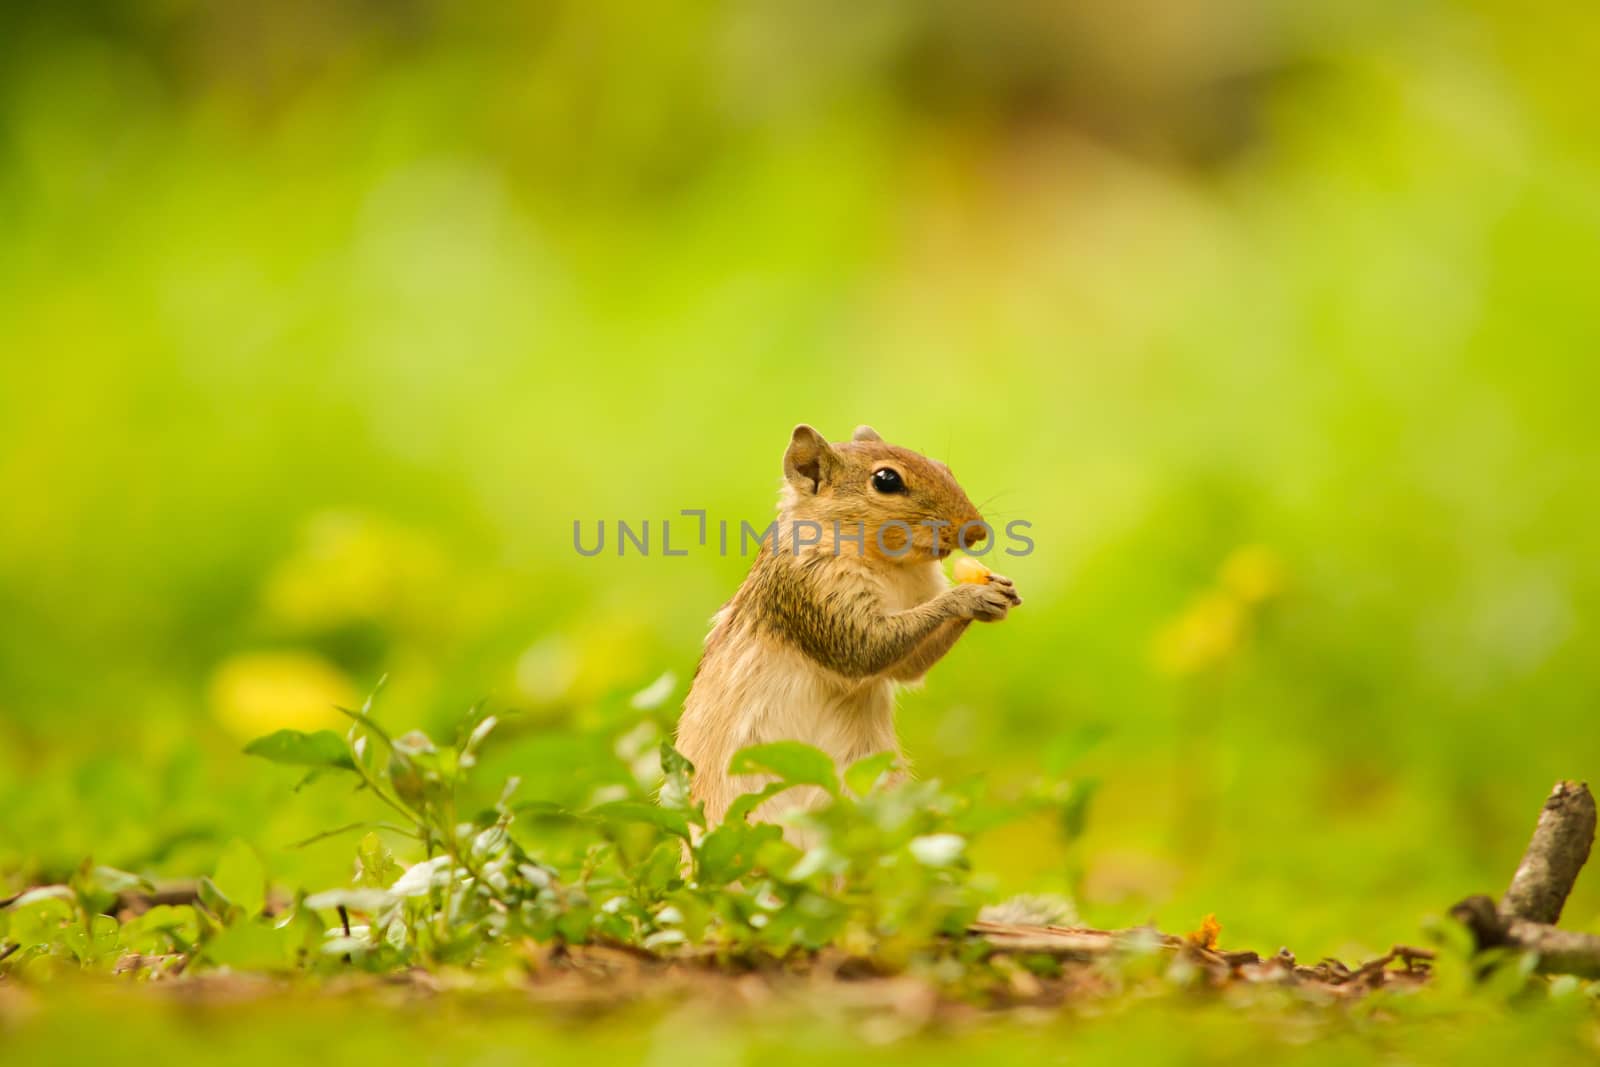 Close up of a Squirrel eating corn with green backdrop by lakshmiprasad.maski@gmai.com